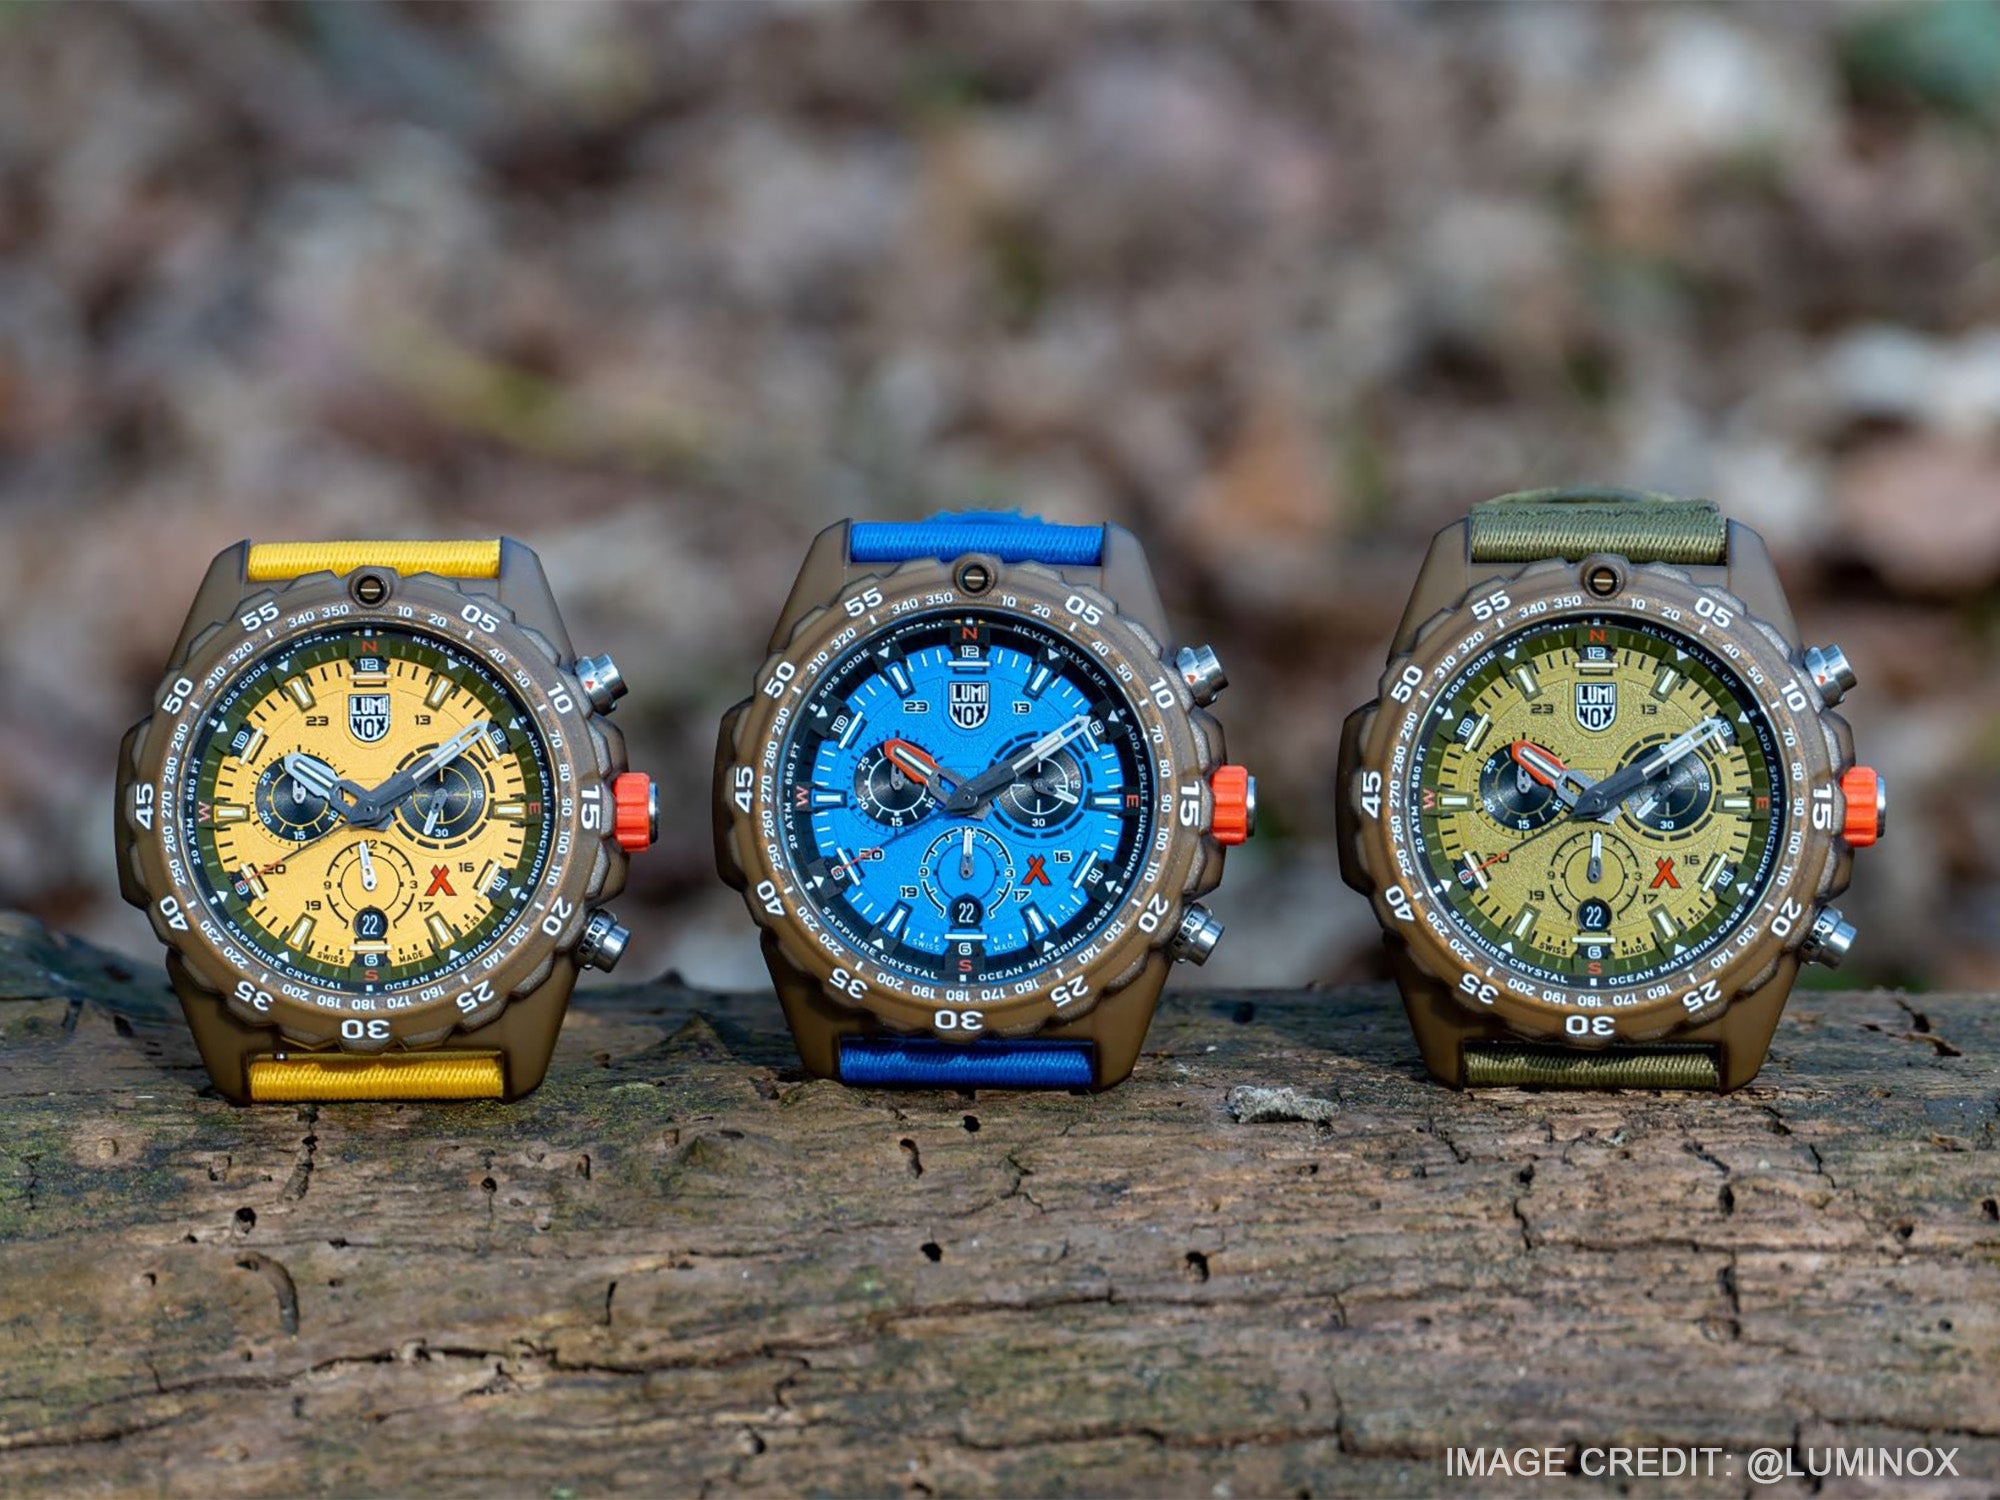 Luminox Bear Grylls Survival Master series make use of a new upcycle plastic material